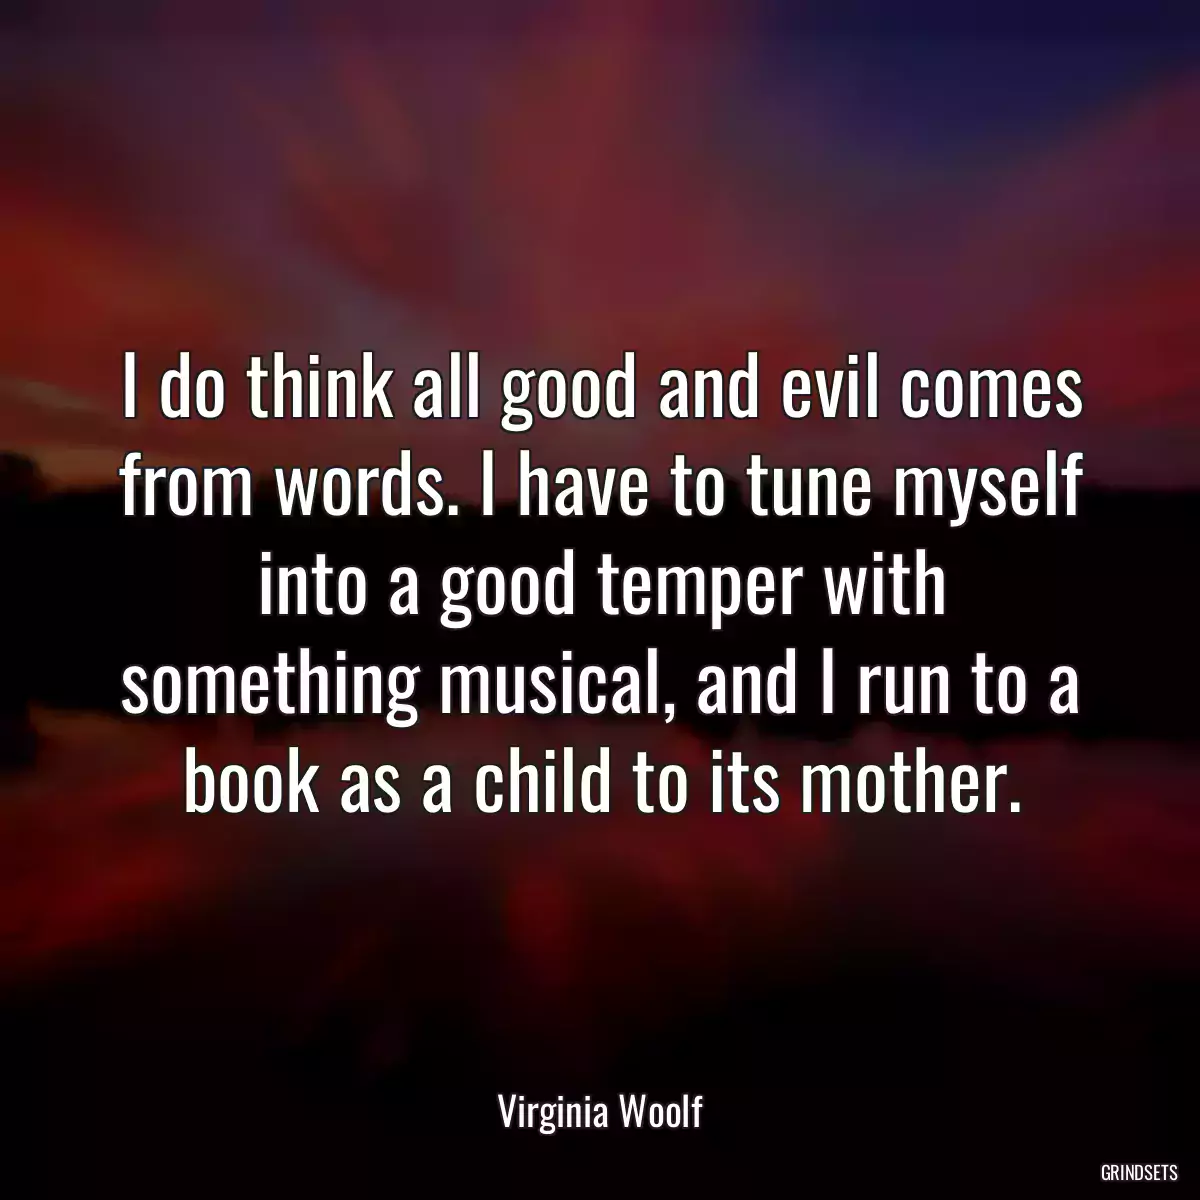 I do think all good and evil comes from words. I have to tune myself into a good temper with something musical, and I run to a book as a child to its mother.